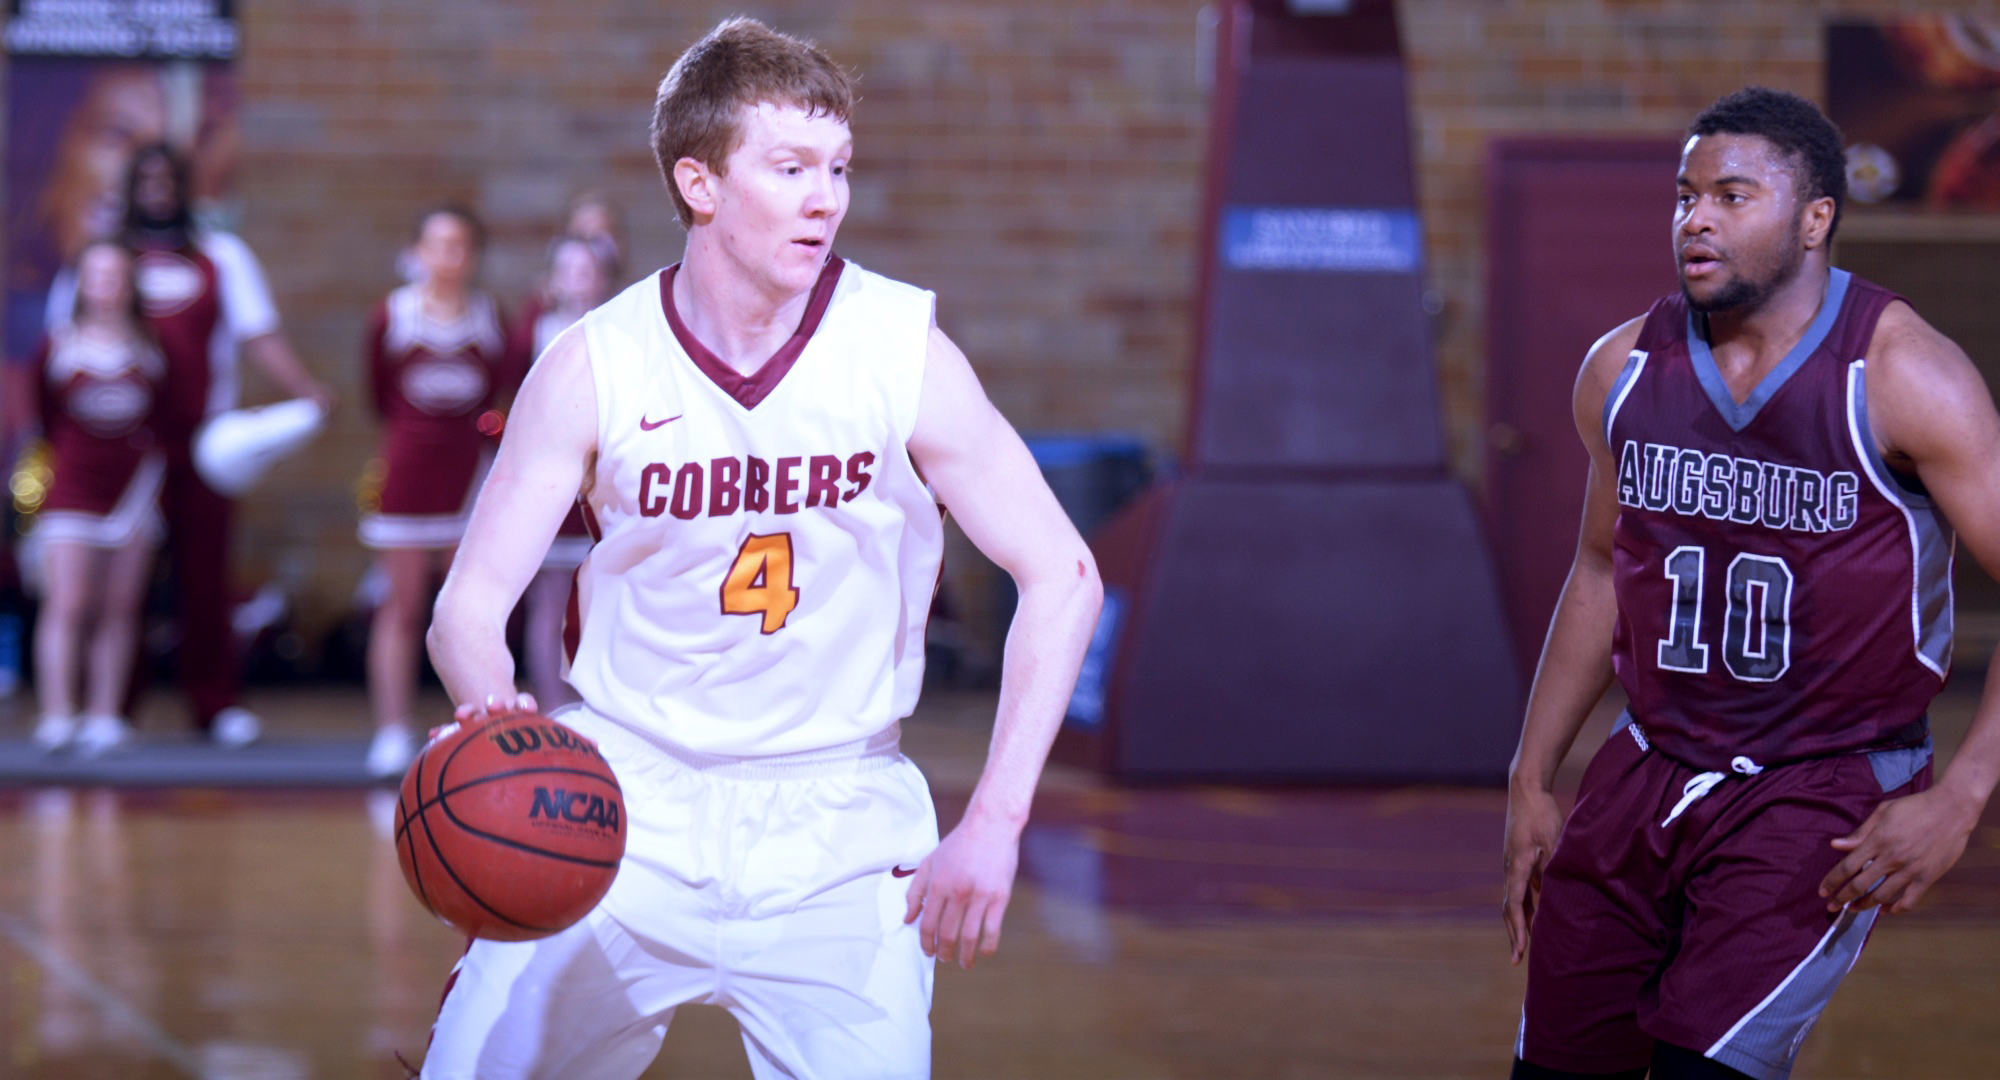 Senior guard Collin Larson scored a season-high 20 points in the Cobbers' game at Augsburg.